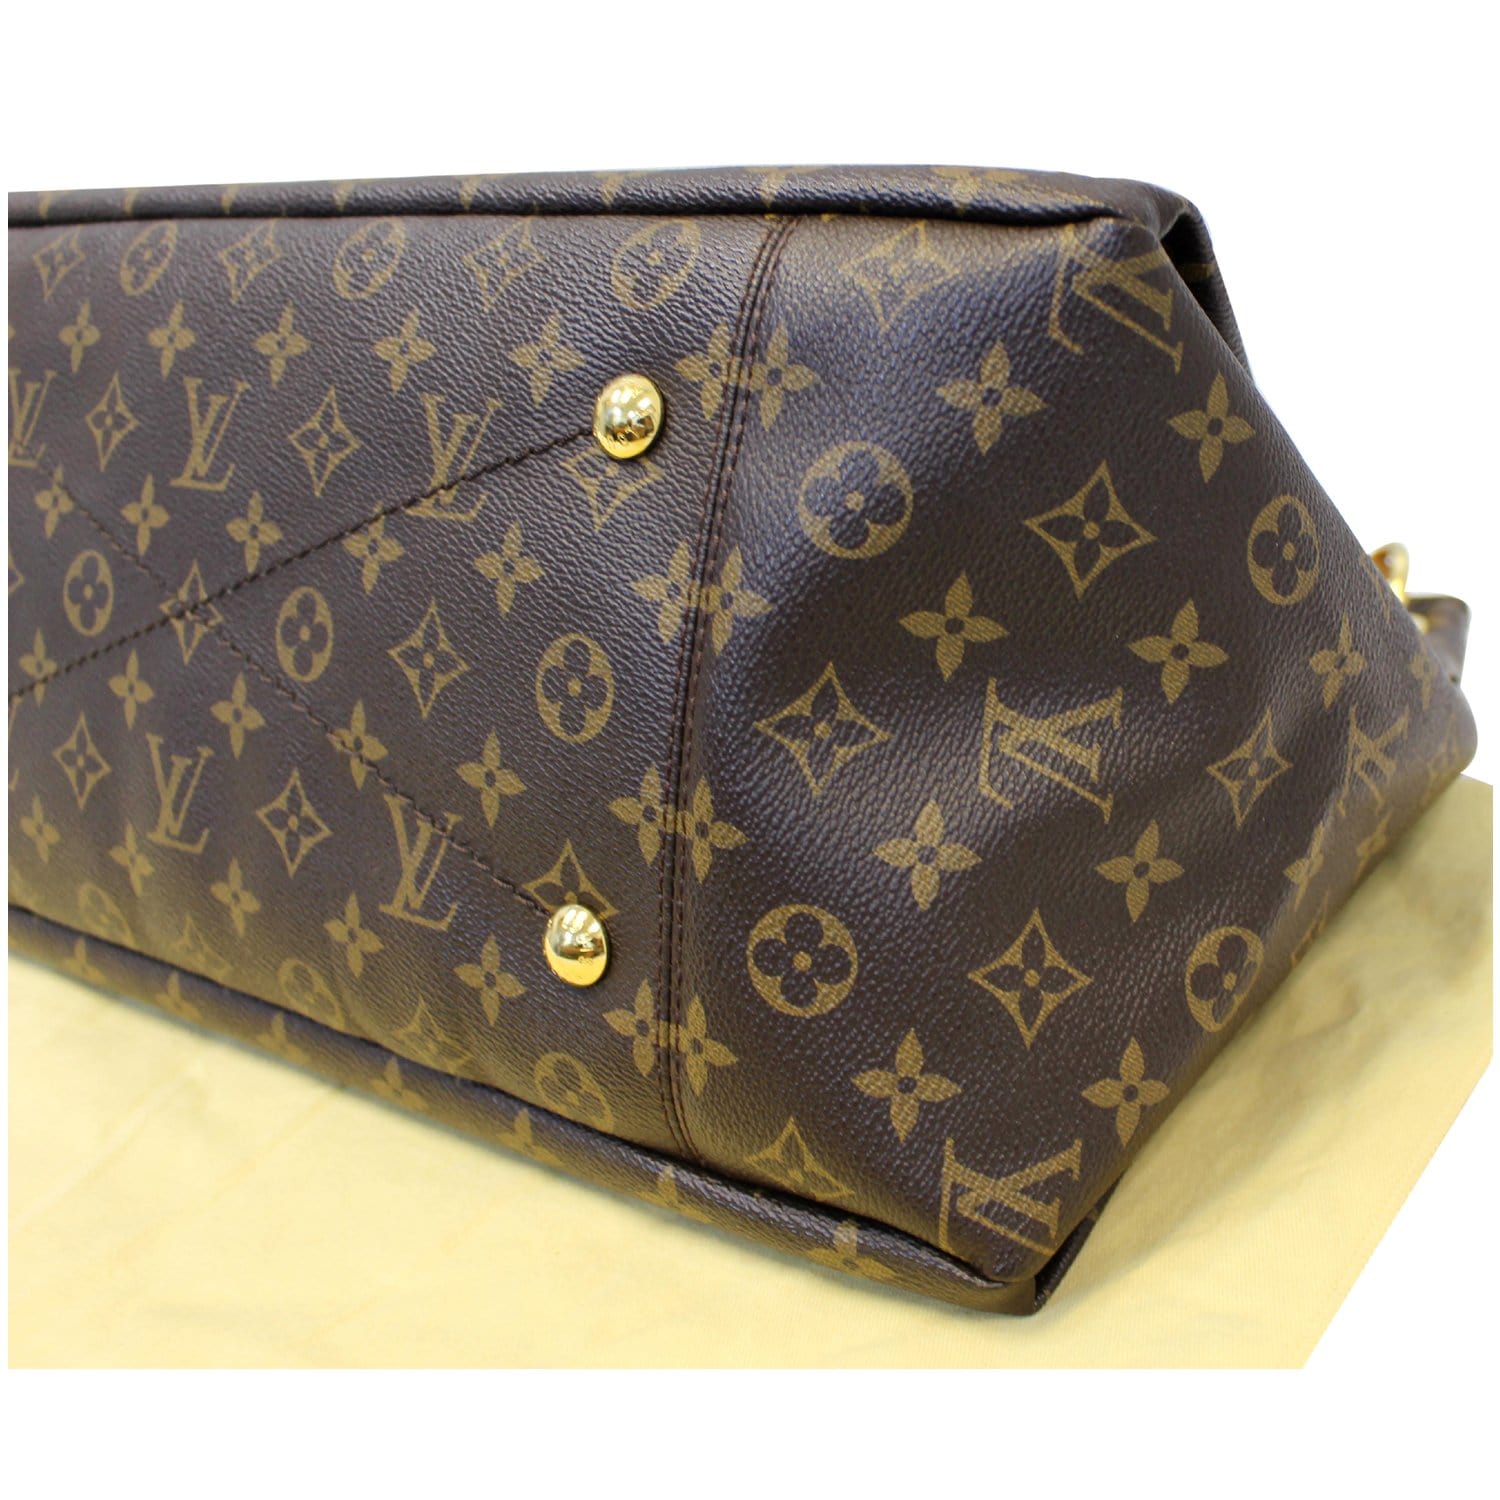 Liked New~LOUIS VUITTON "Artsy" Classic Brown Monogram